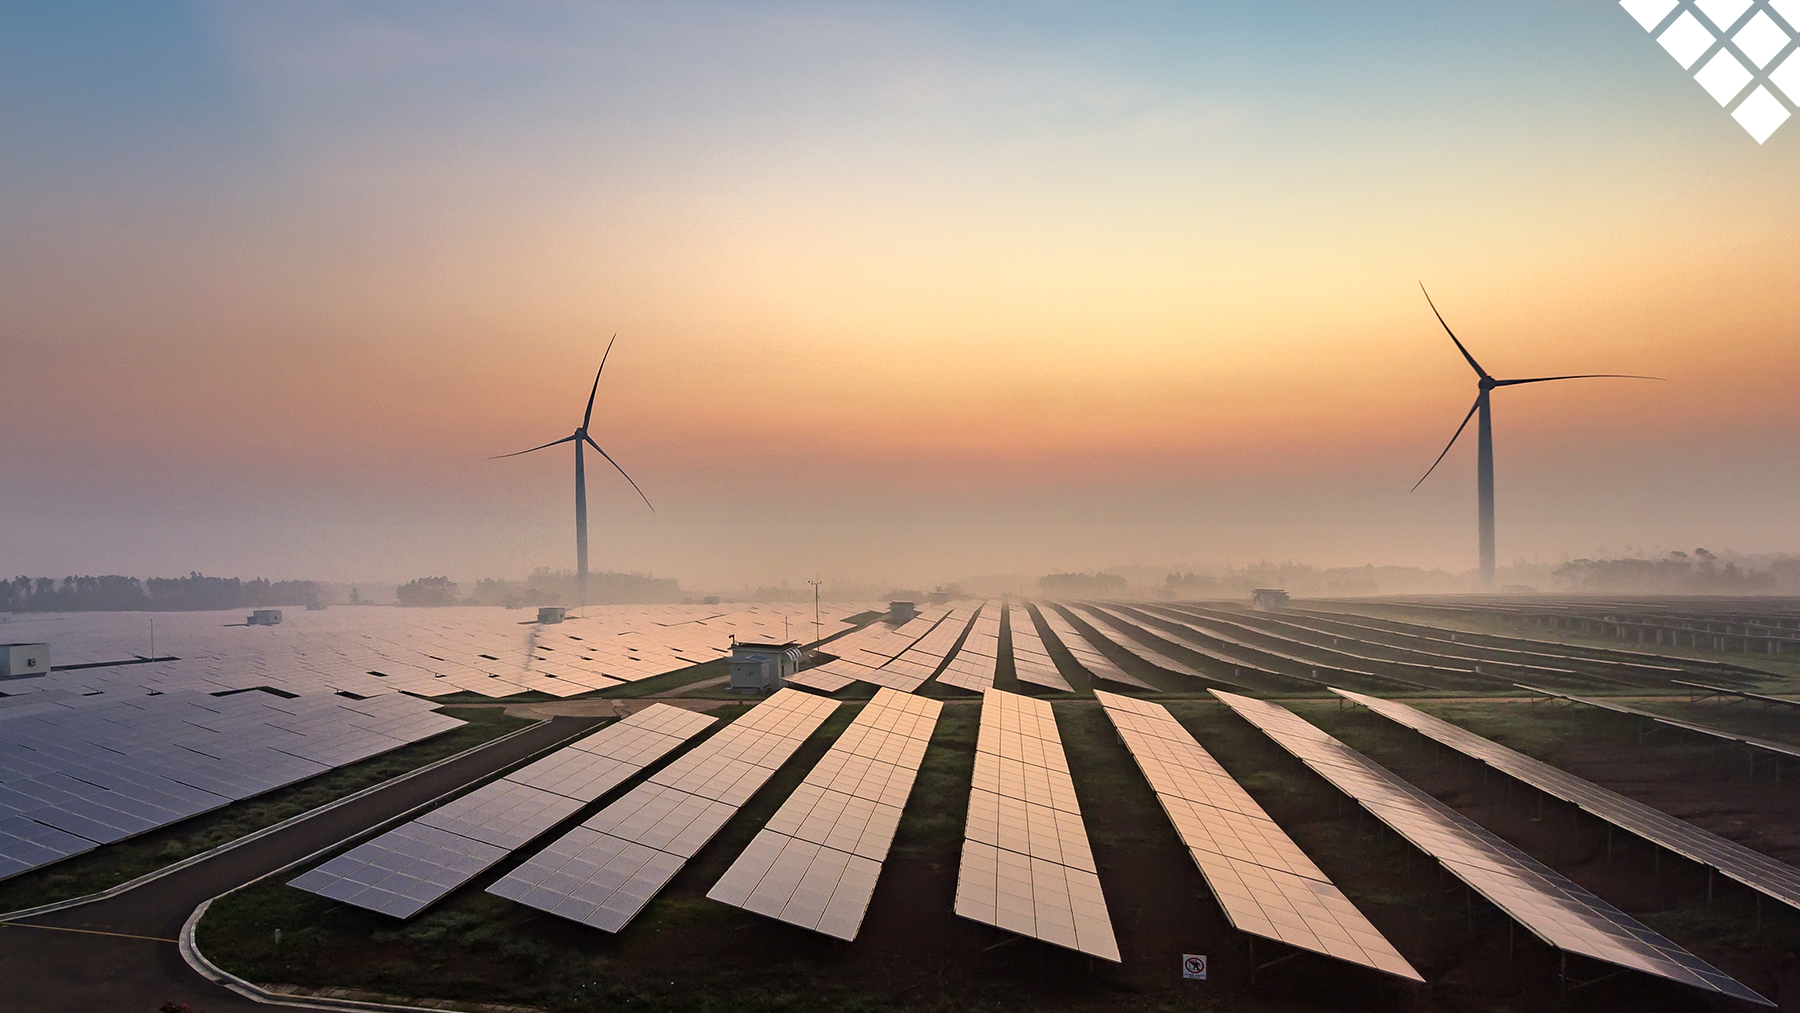 Beautiful sunrise with solar panels in foreground and wind turbines behind them